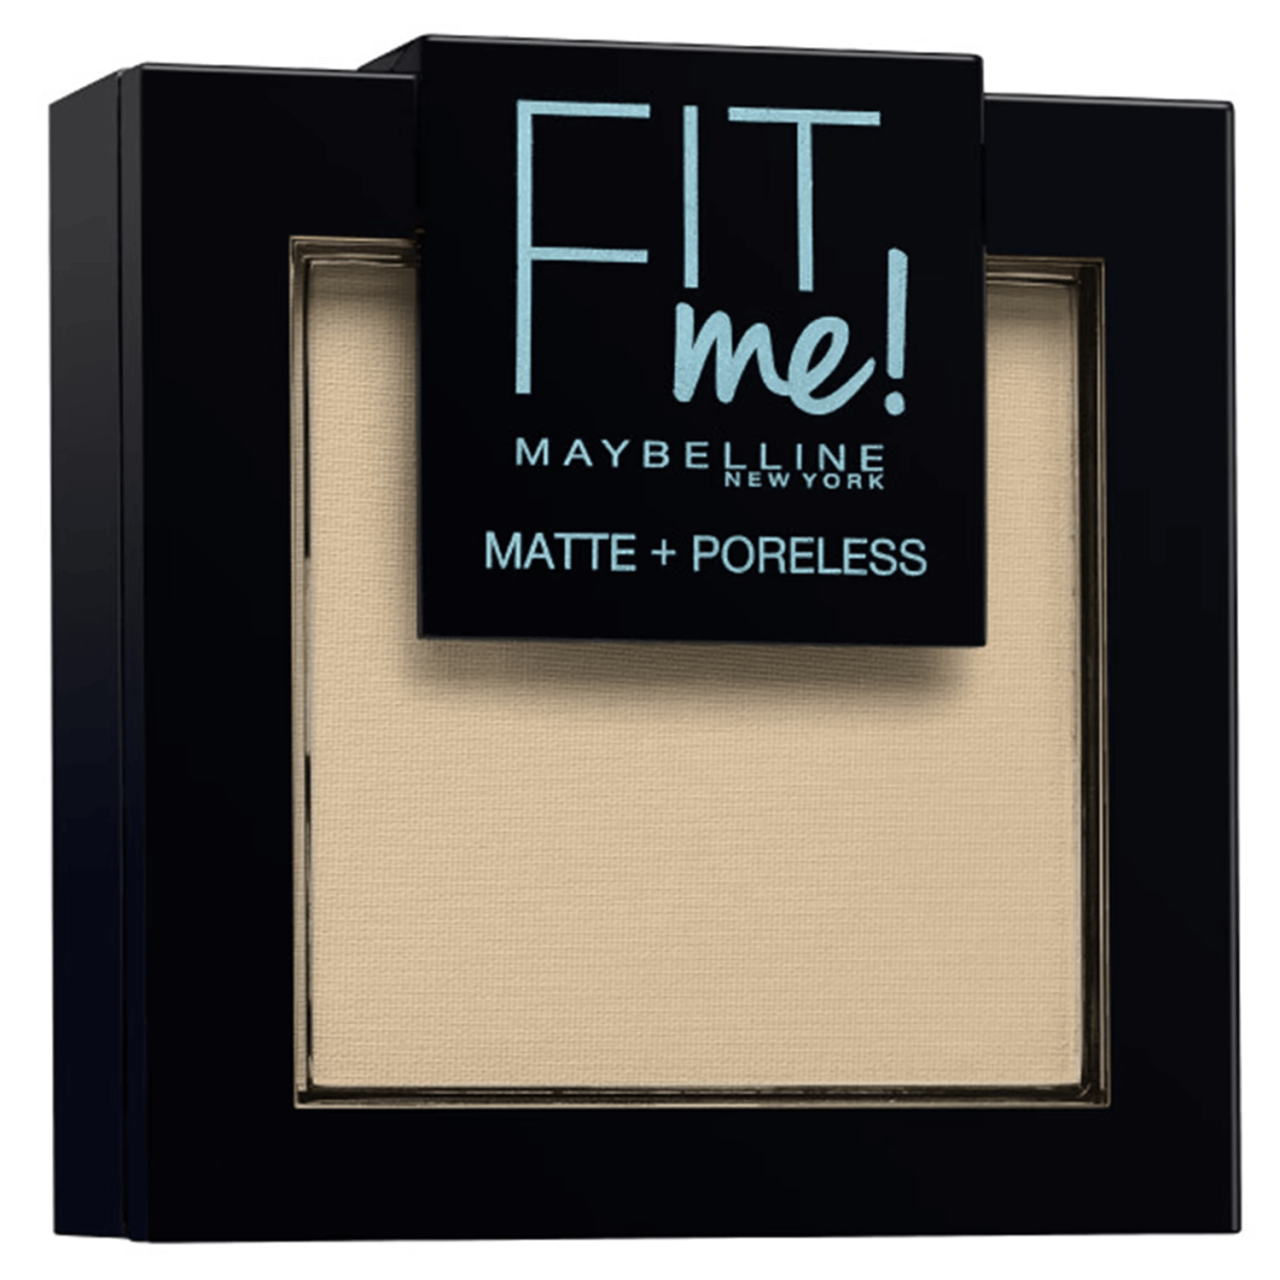 Maybelline NY Teint - Fit Me! Matte + Poreless Puder Nr. 105 Natural von Maybelline New York